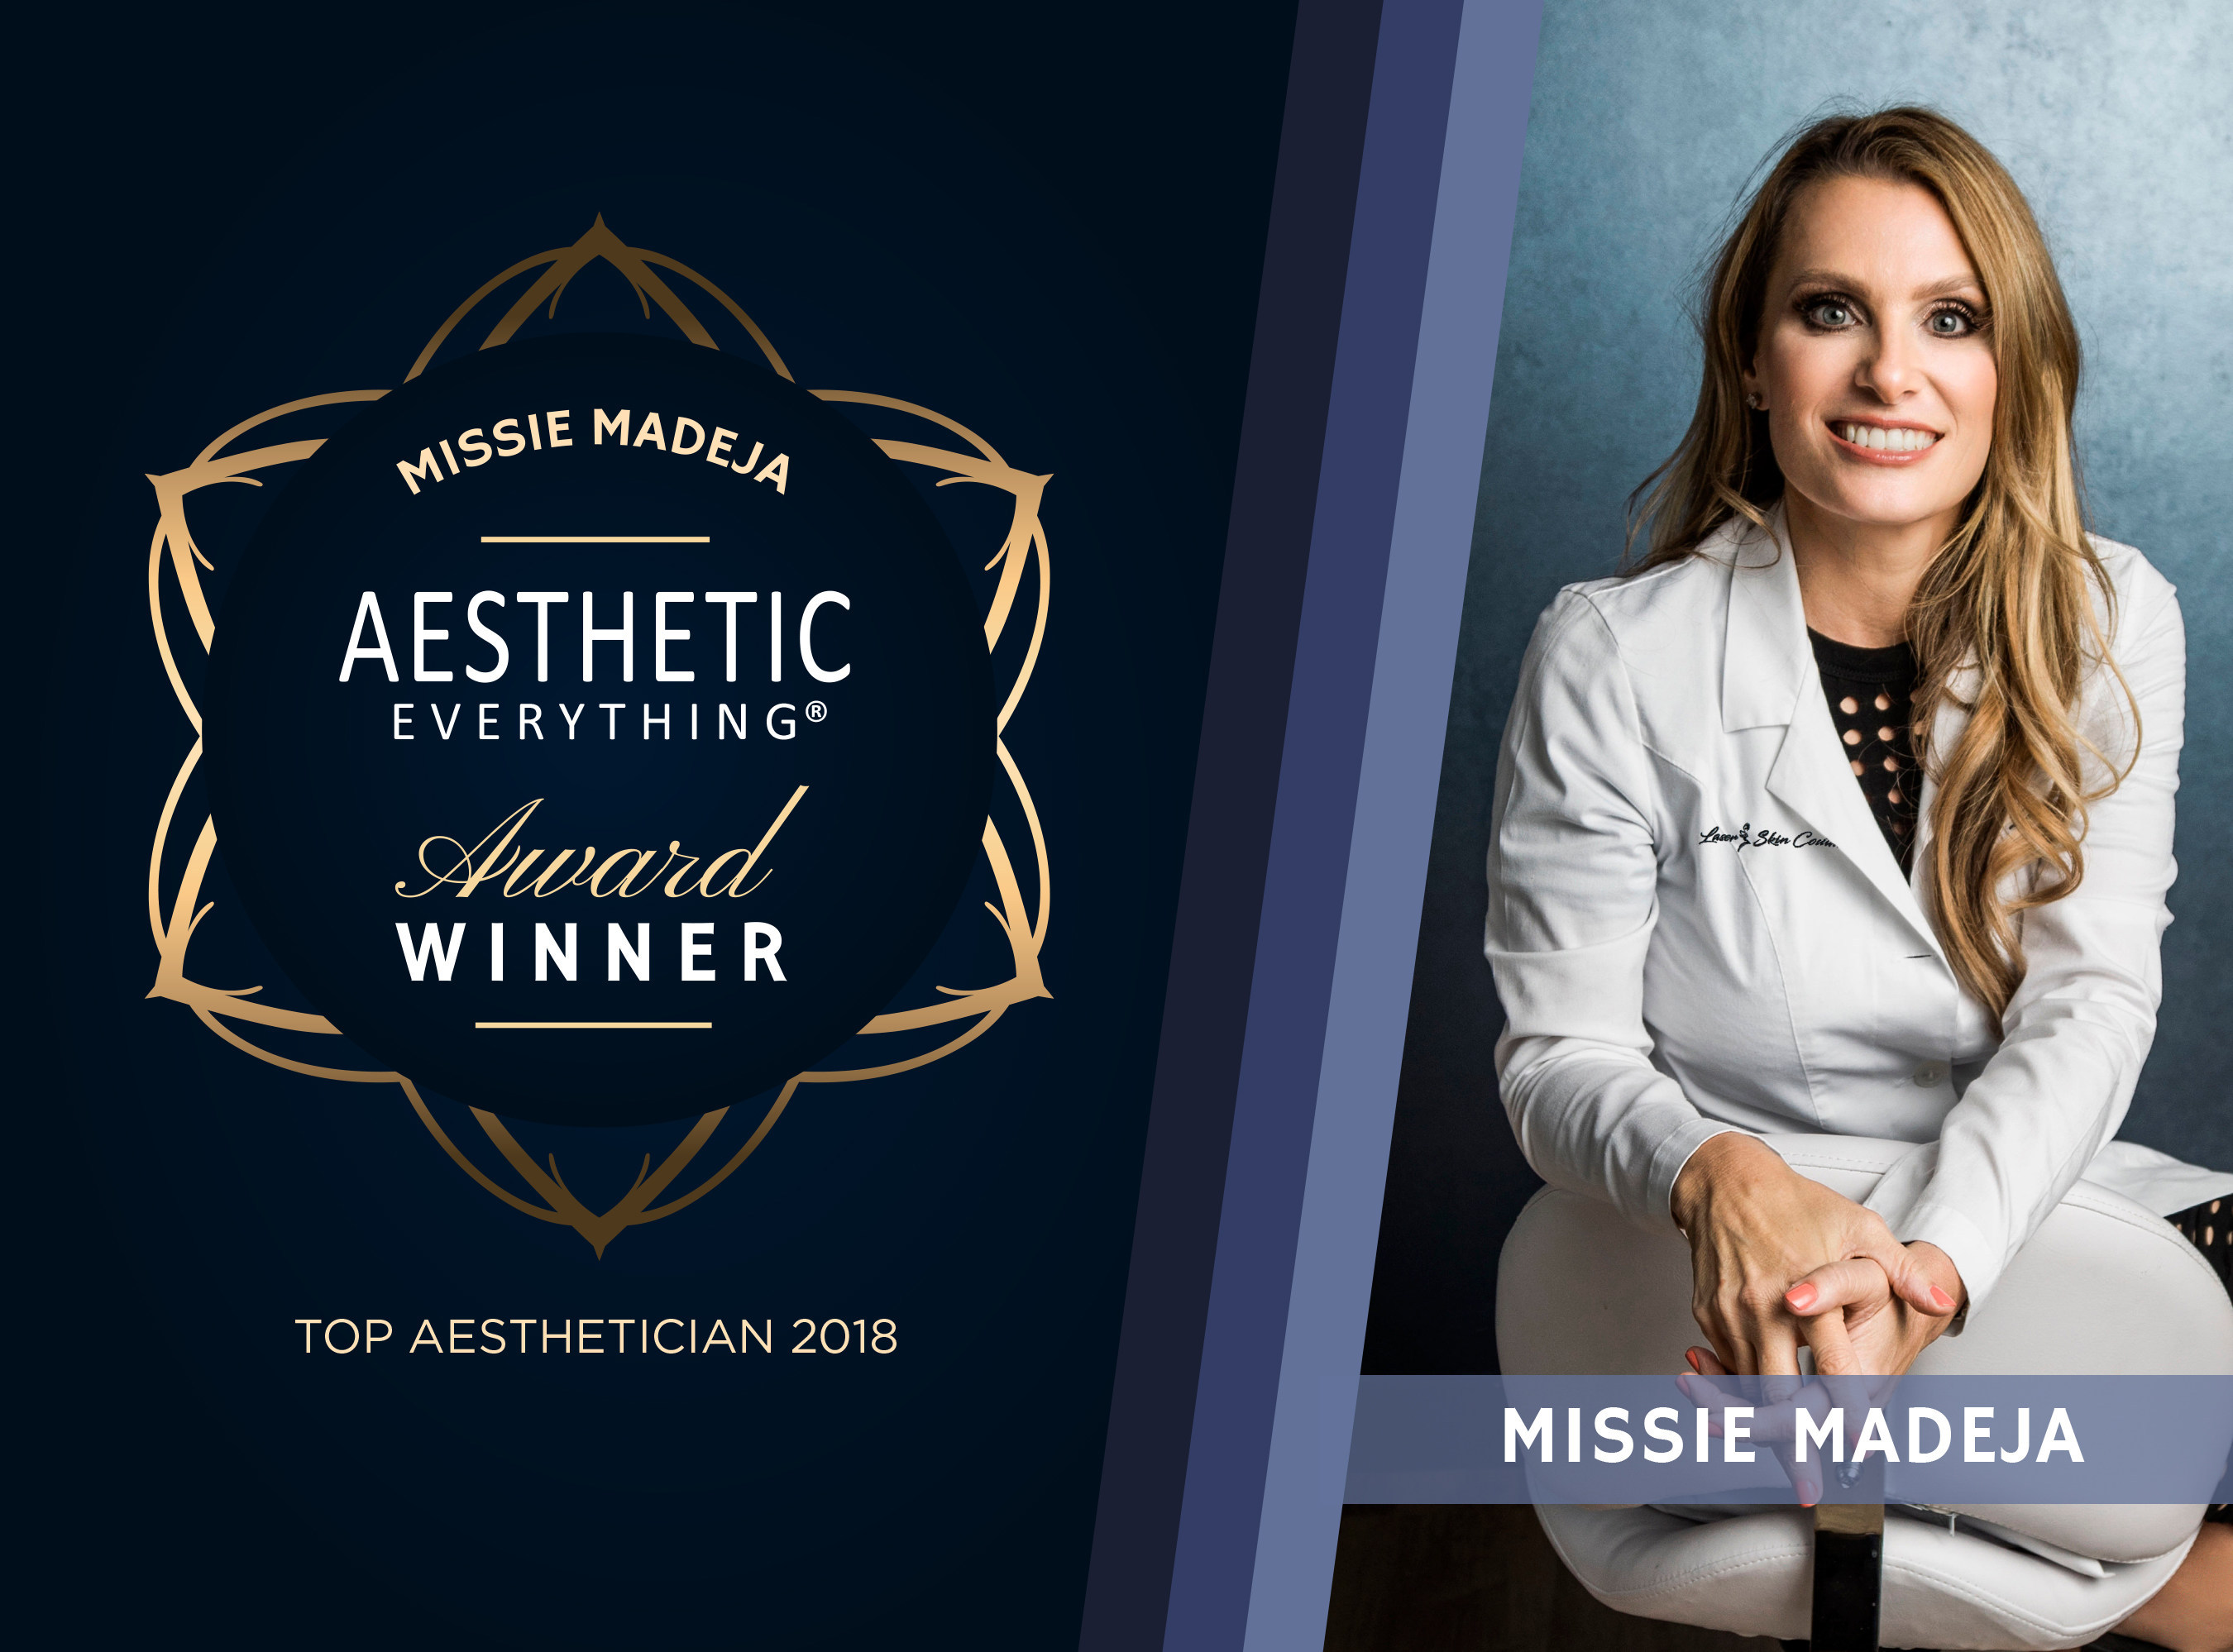 Missie Madeja of Laser Skin Couture Receives Top Aesthetician Award in the 2018 Aesthetic Everything(R) Awards (PRNewsfoto/Aesthetic Everything)